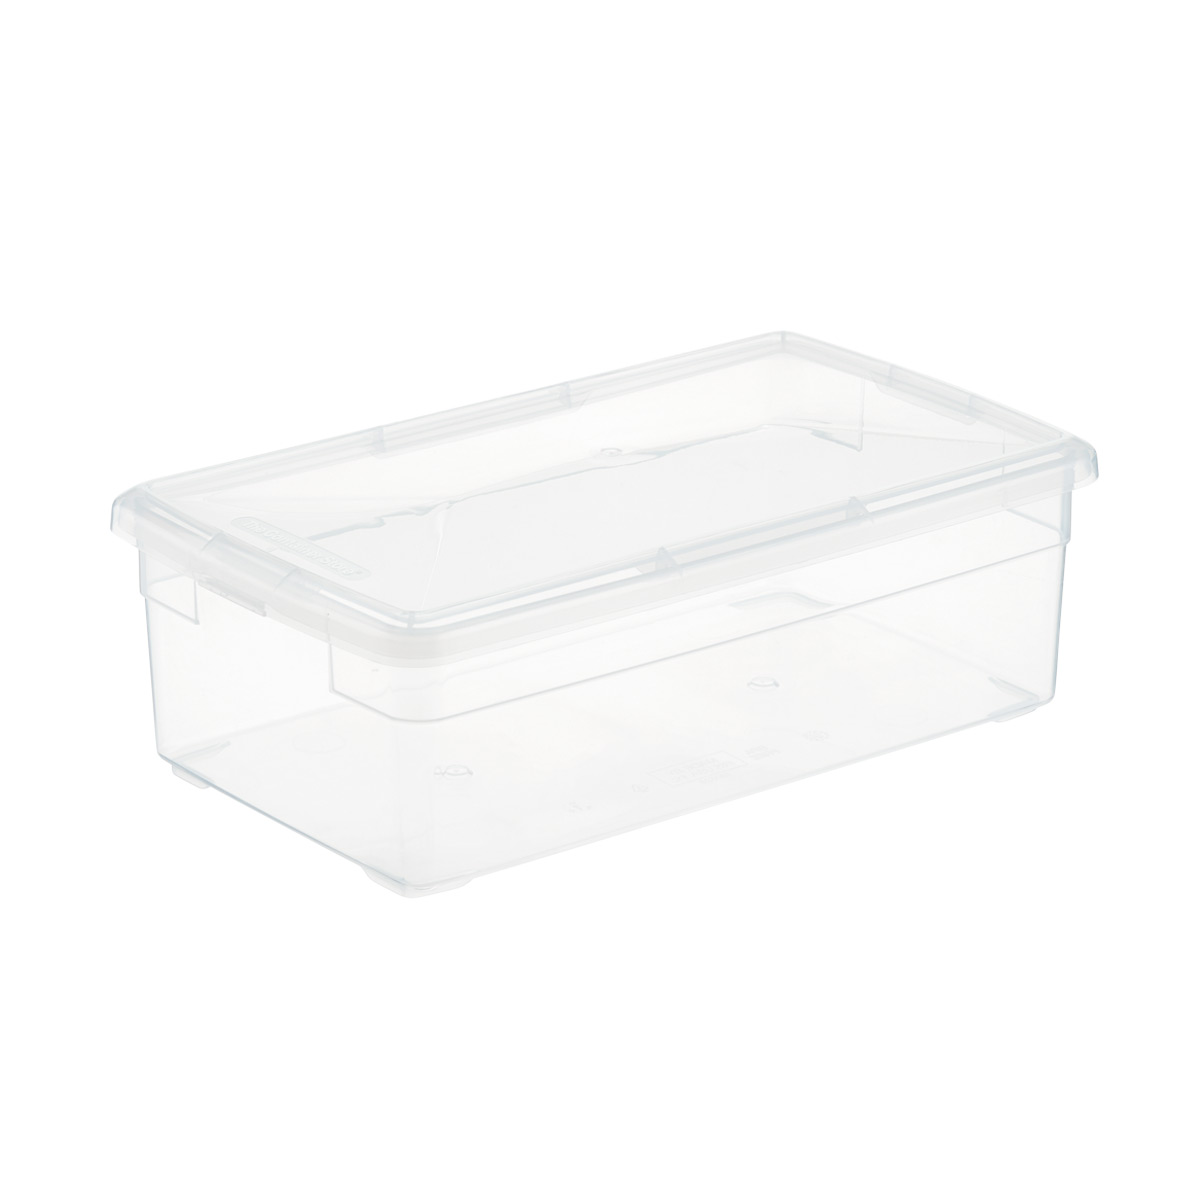 https://images.containerstore.com/catalogimages/356418/10008759-our-shoe-box.jpg